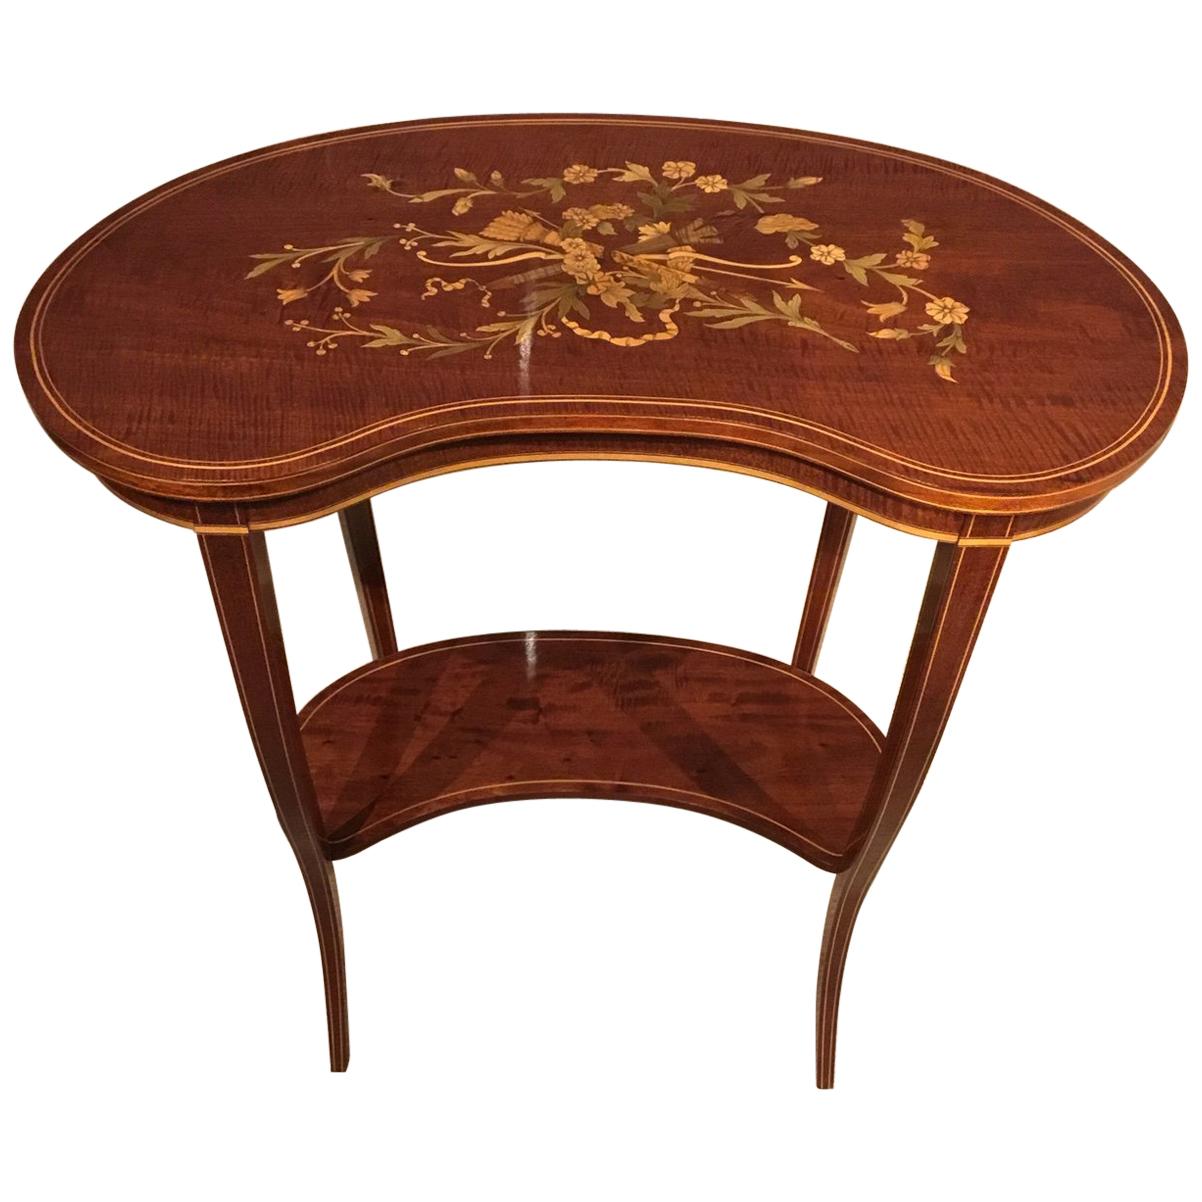 Mahogany Inlaid Edwardian Period Kidney Shaped Occasional Table For Sale